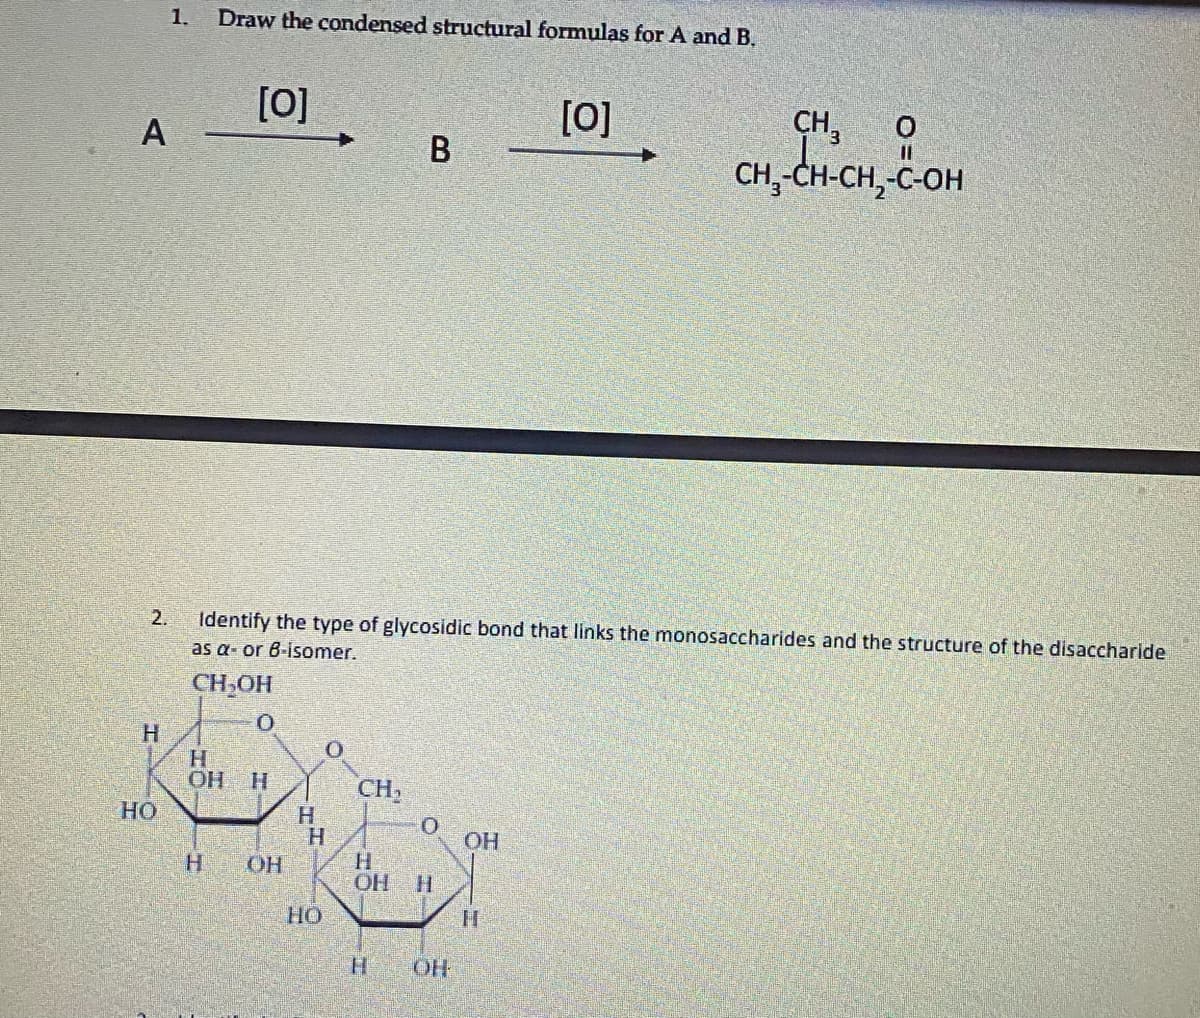 1.
Draw the condensed structural formulas for A and B.
[0]
[0]
CH,
CH, CH-CH, C-OH
А
B
2.
Identify the type of glycosidic bond that links the monosaccharides and the structure of the disaccharide
as a- or 8-isomer.
CH-OH
H.
H
OH
H.
CH,
HO
OH
H.
H.
ОН Н
OH
HO
H.
OH
A,
